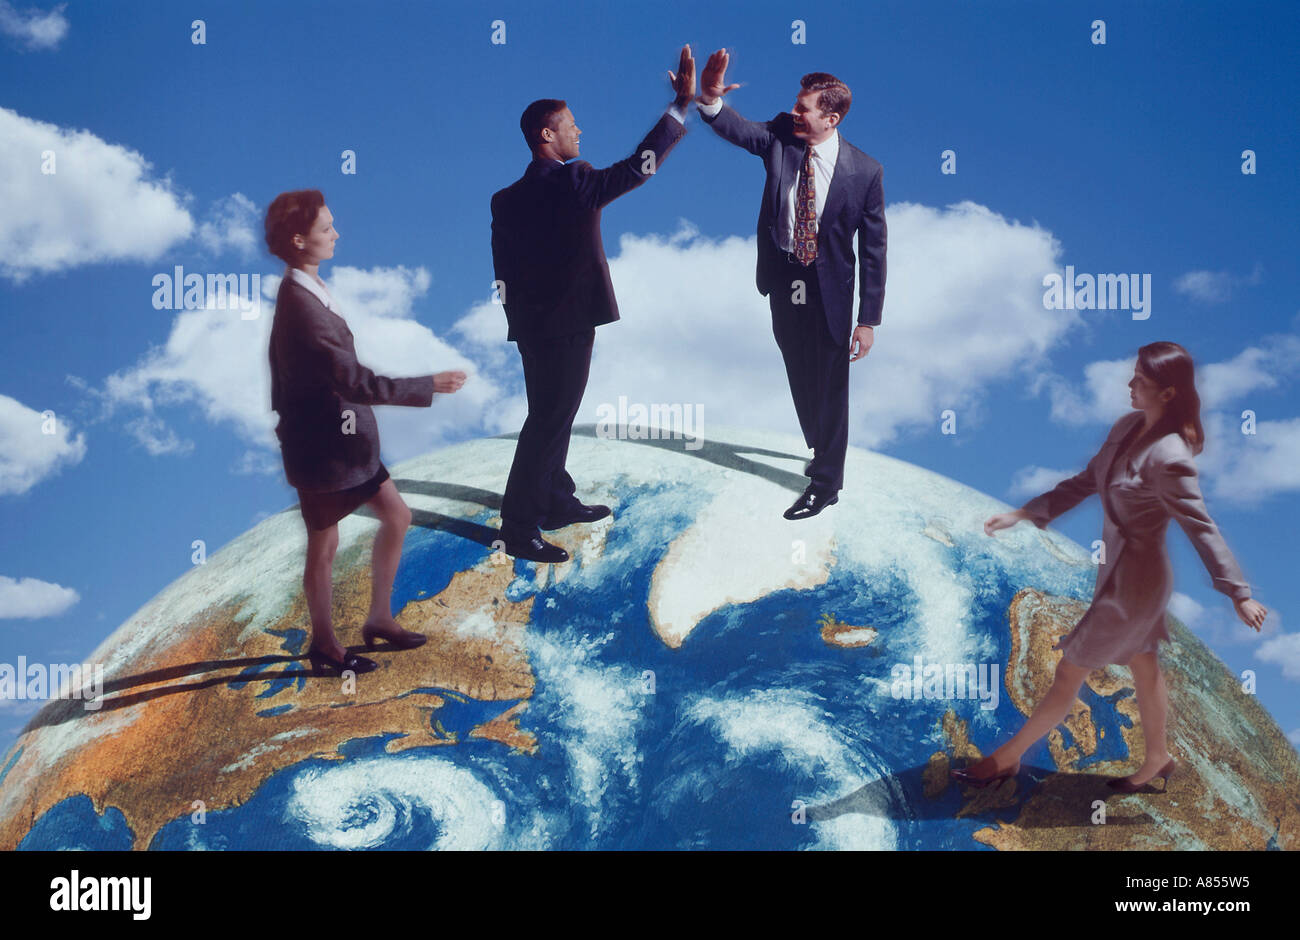 International business concept of four people on top of the world. Stock Photo